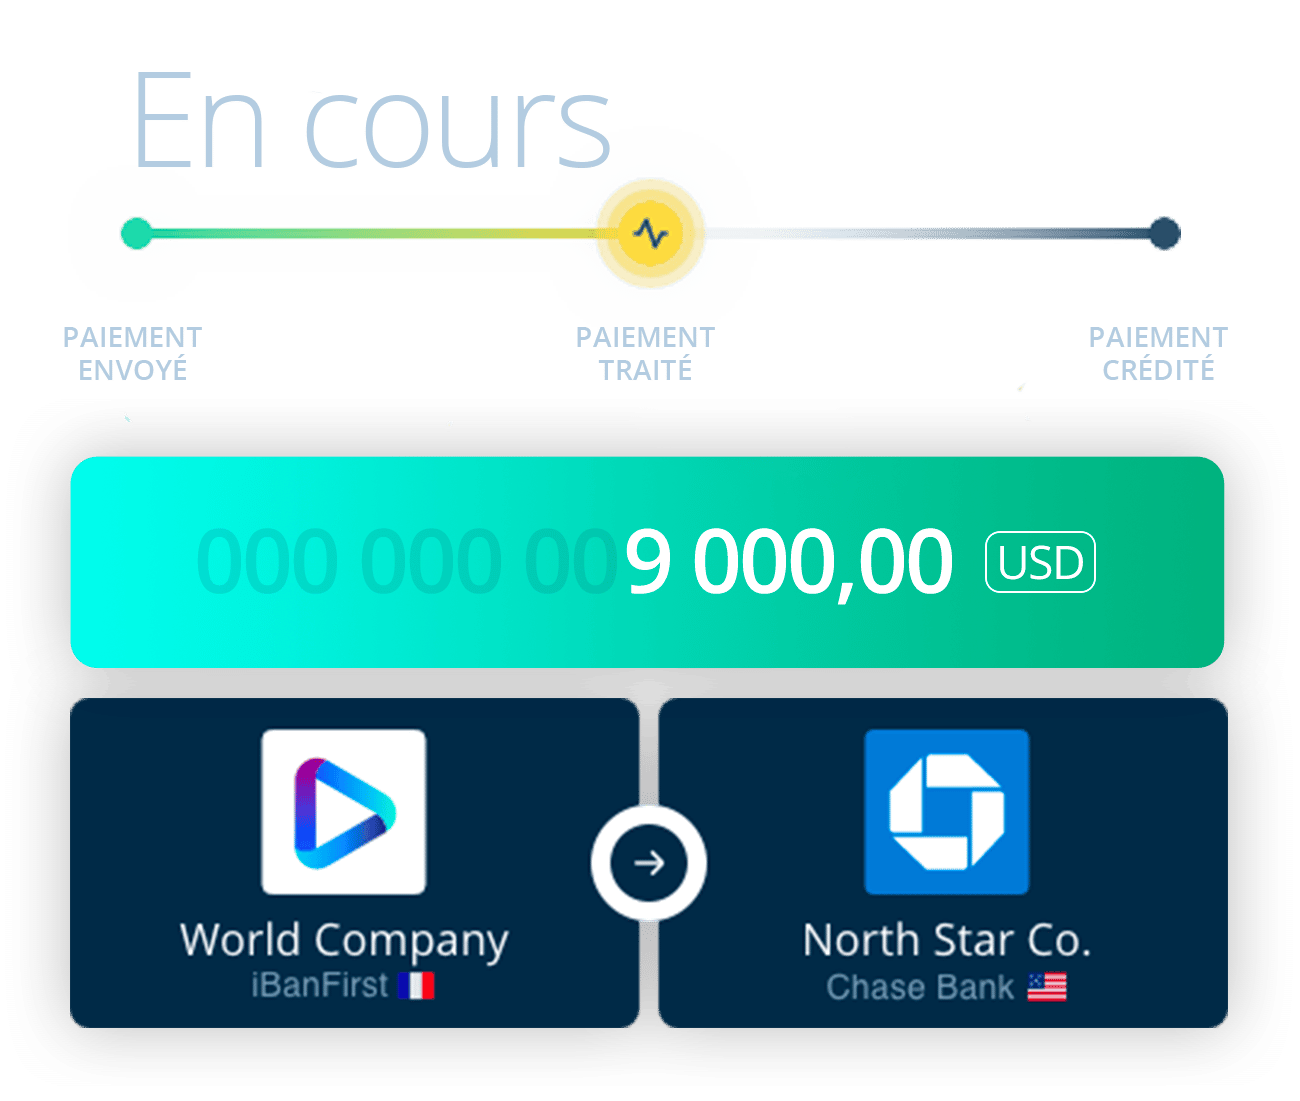 Payment Tracker Iban First